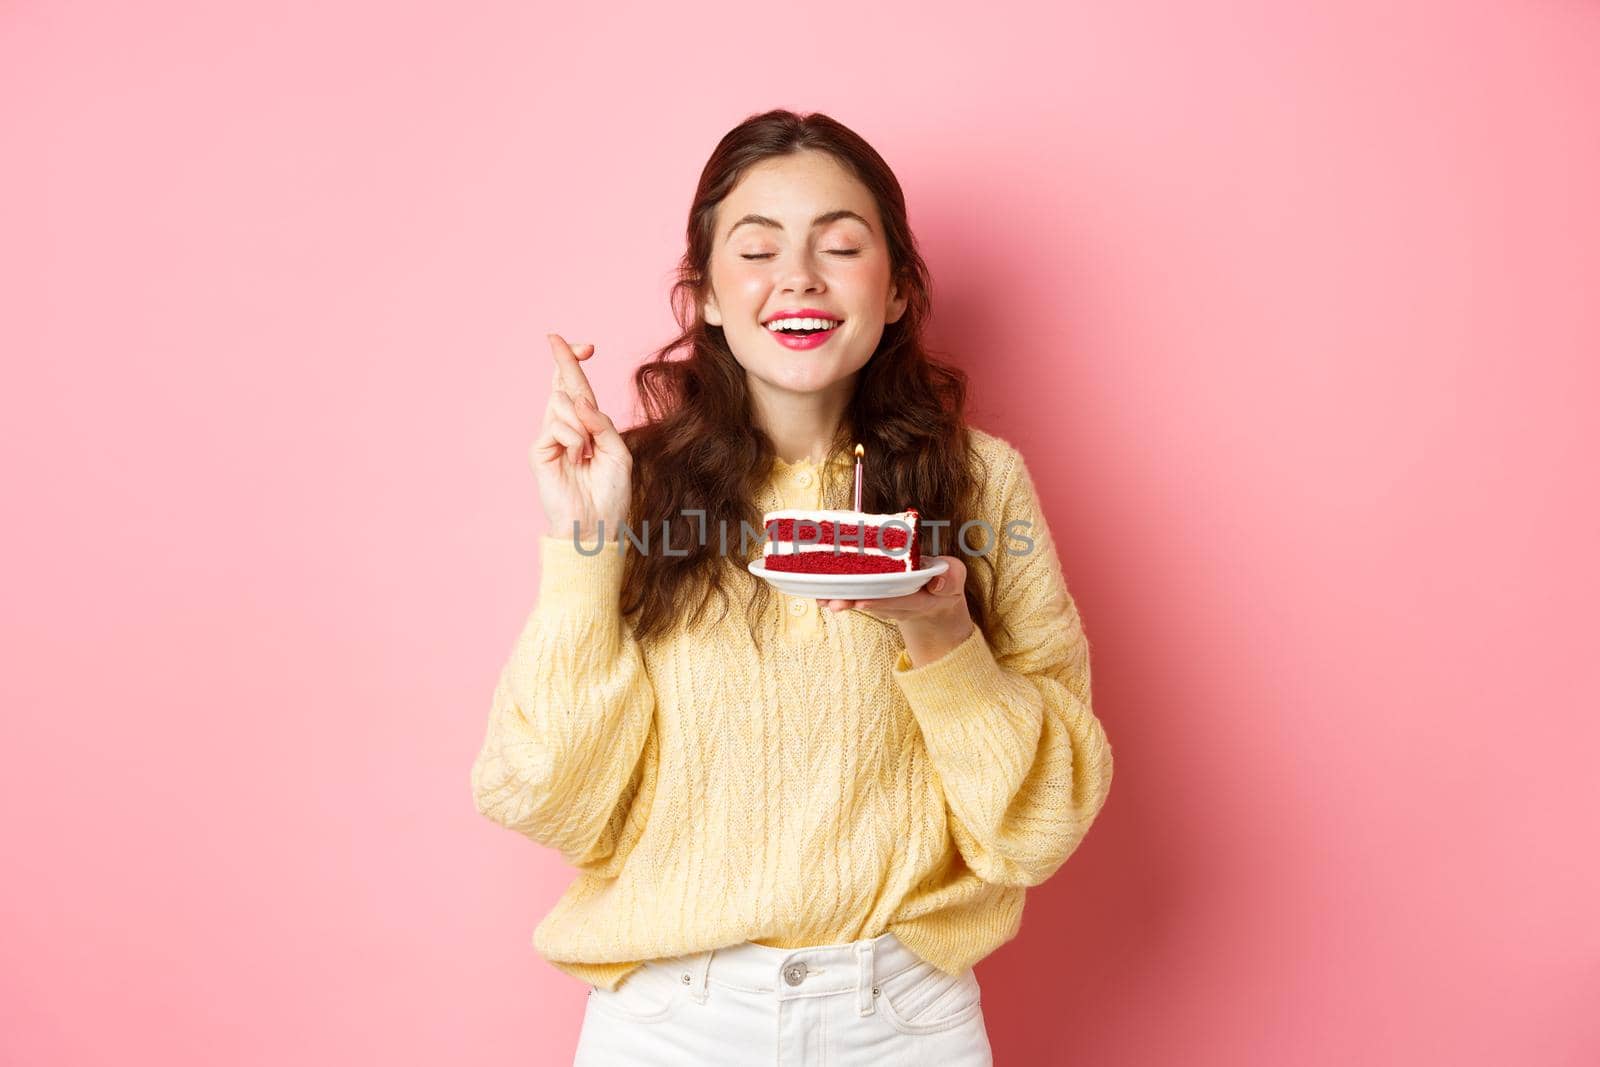 Celebration and holidays. Happy woman celebrates her birthday, makes wish with closed eyes and crossed fingers, holds bday cake with one candle, stands on pink background.